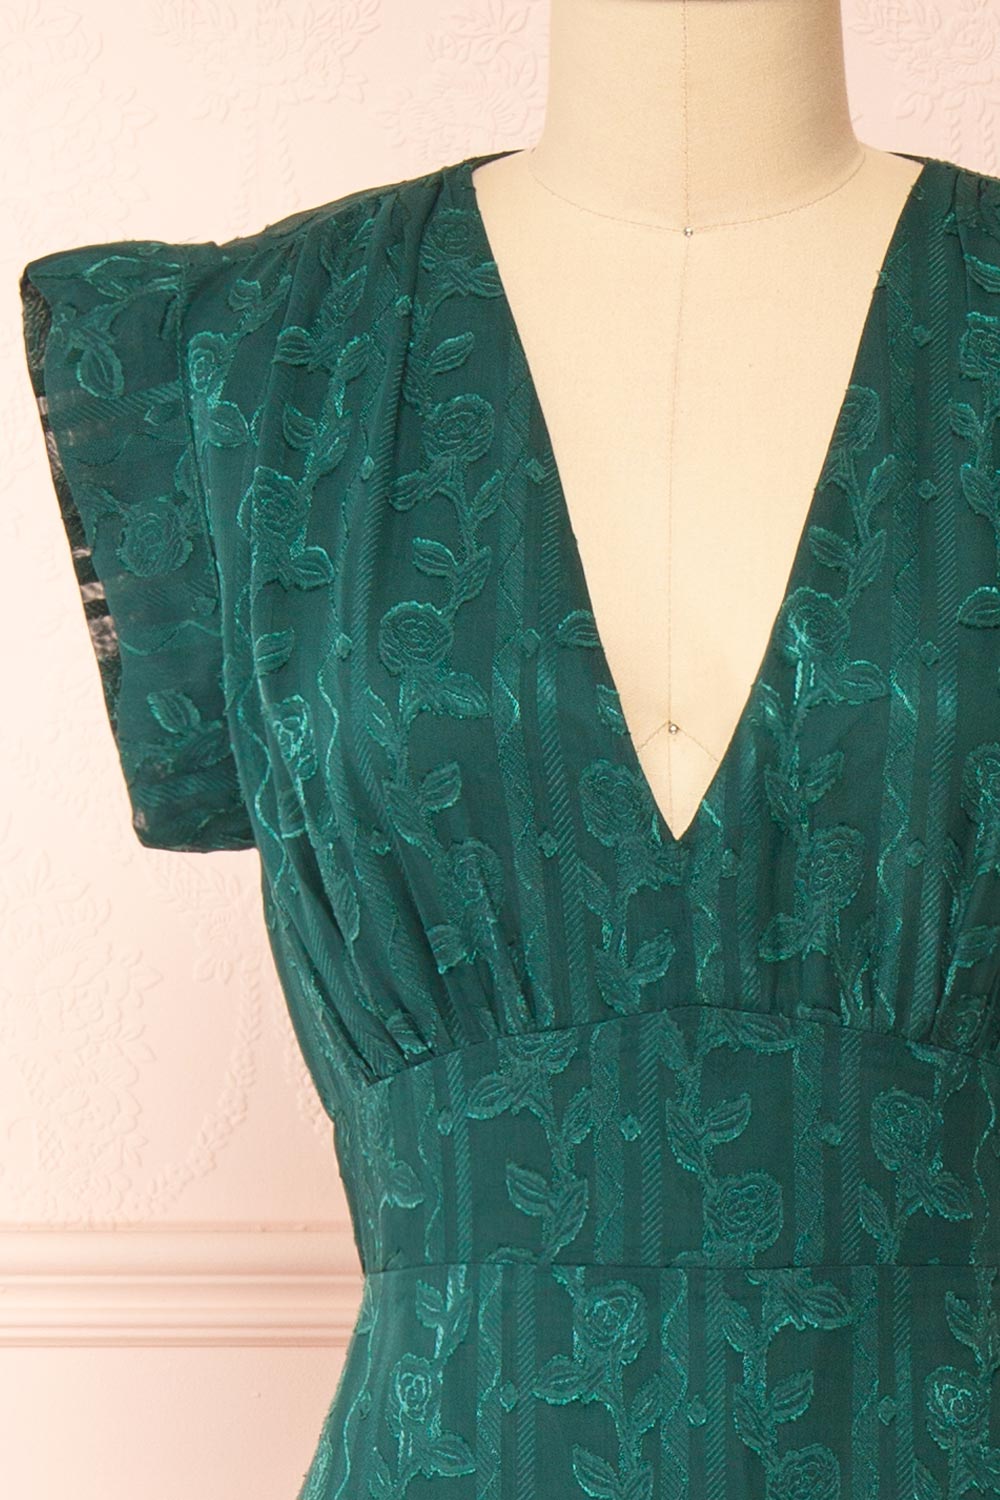 Evadora Green Midi Dress w/ Textured Floral Fabric | Boutique 1861 front close-up 